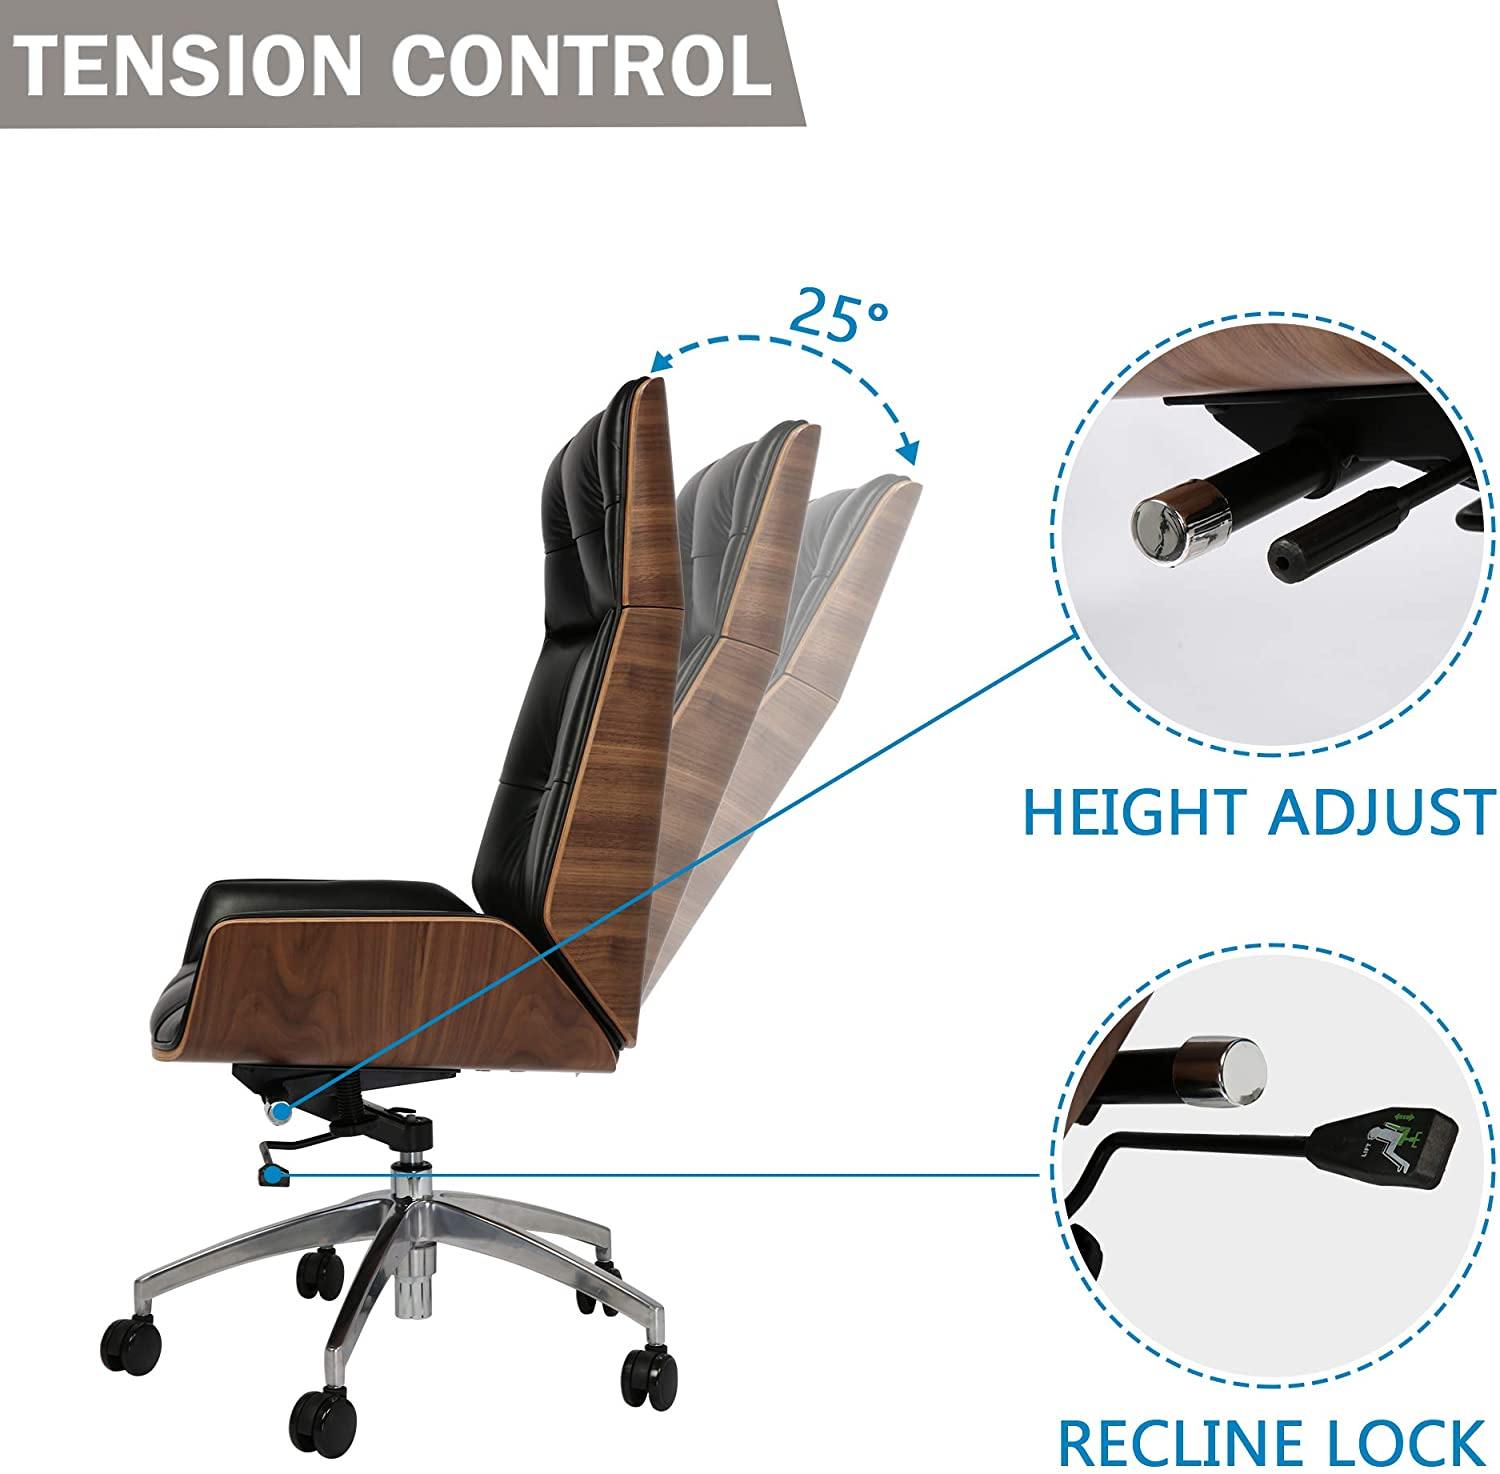 High Back Executive Adjustable Office Chair Upholstered Swivel Chair Task Home Office Chair with Headrest & Wood Walnut Backrest, Black - Bosonshop